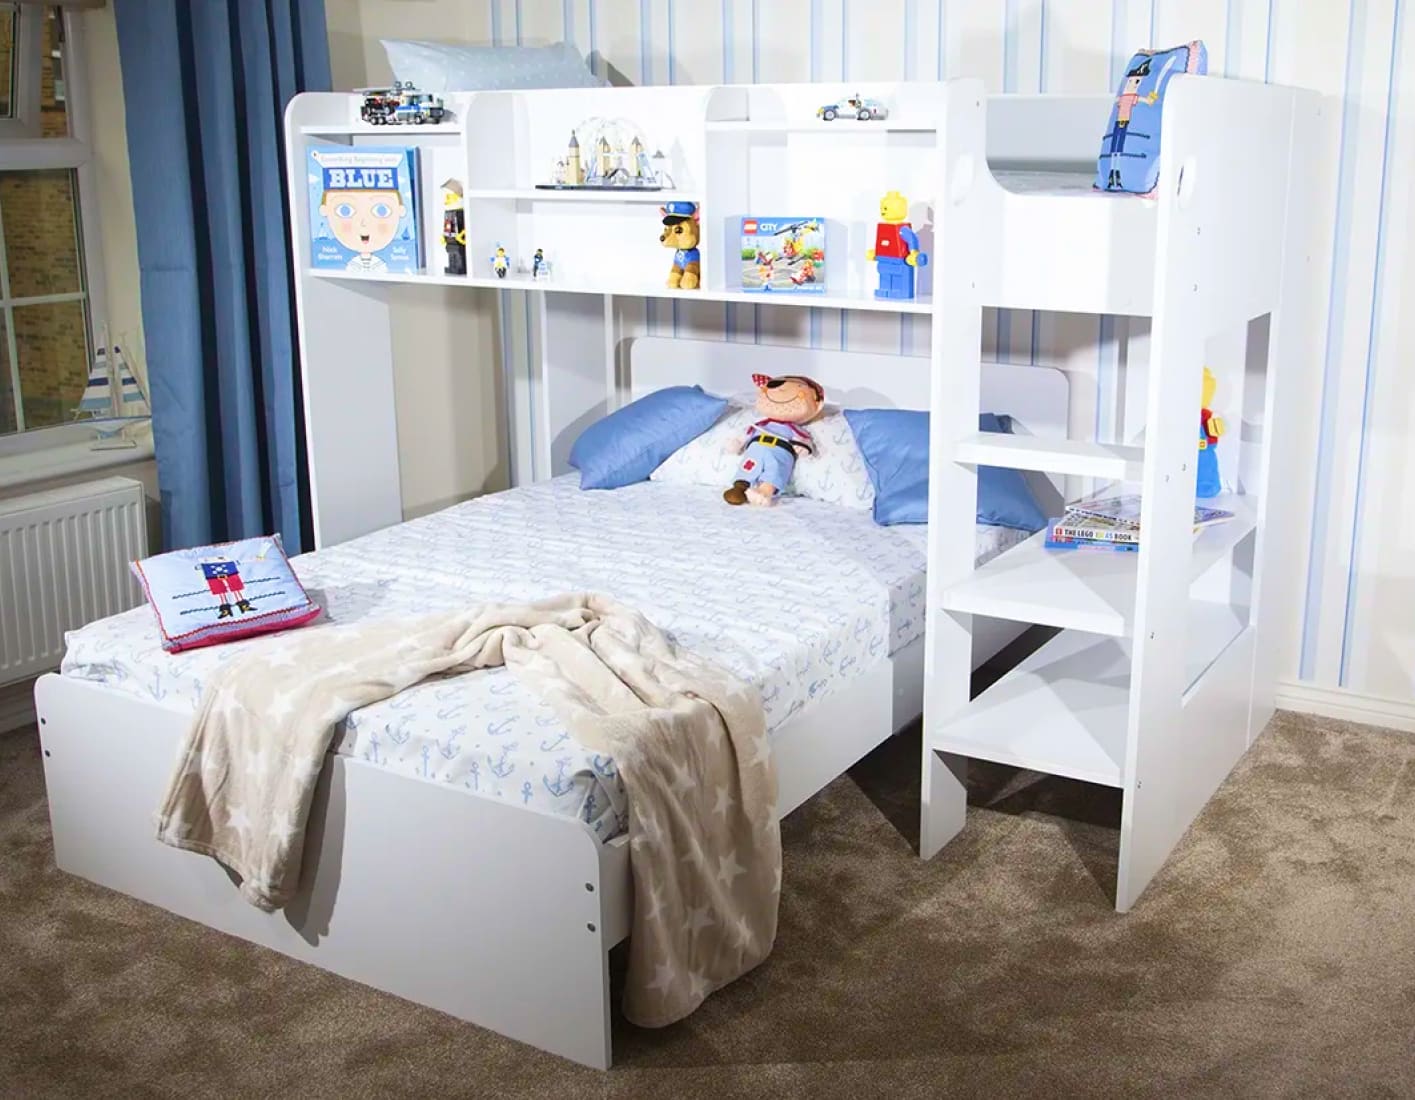 Wizard Bunk Bed L Shaped For Kids, Bunk Beds Ireland